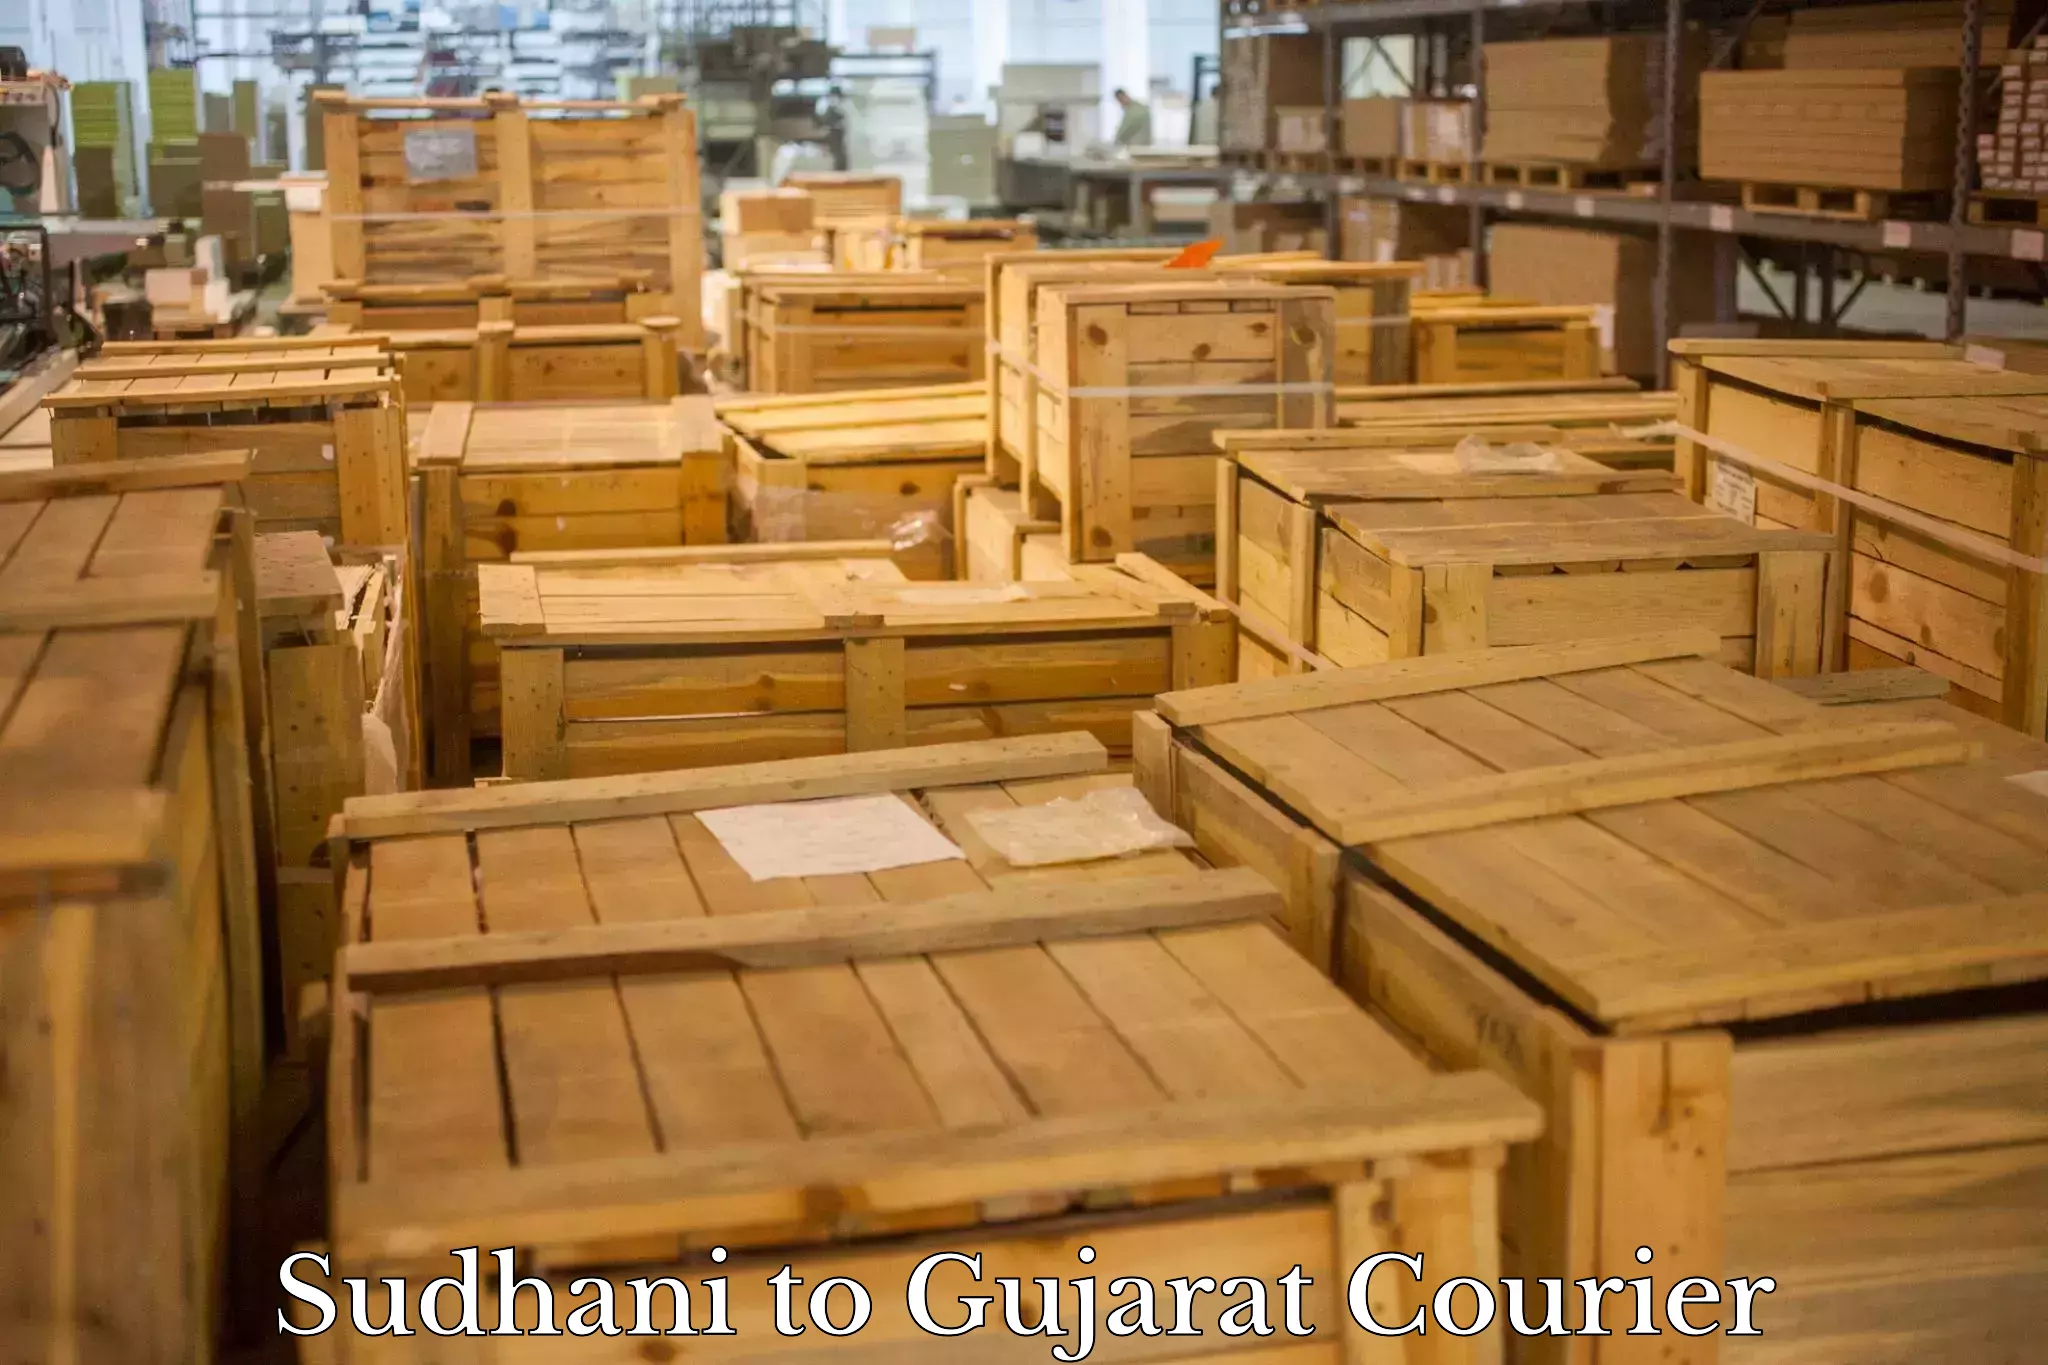 Ocean freight courier in Sudhani to Jetpur